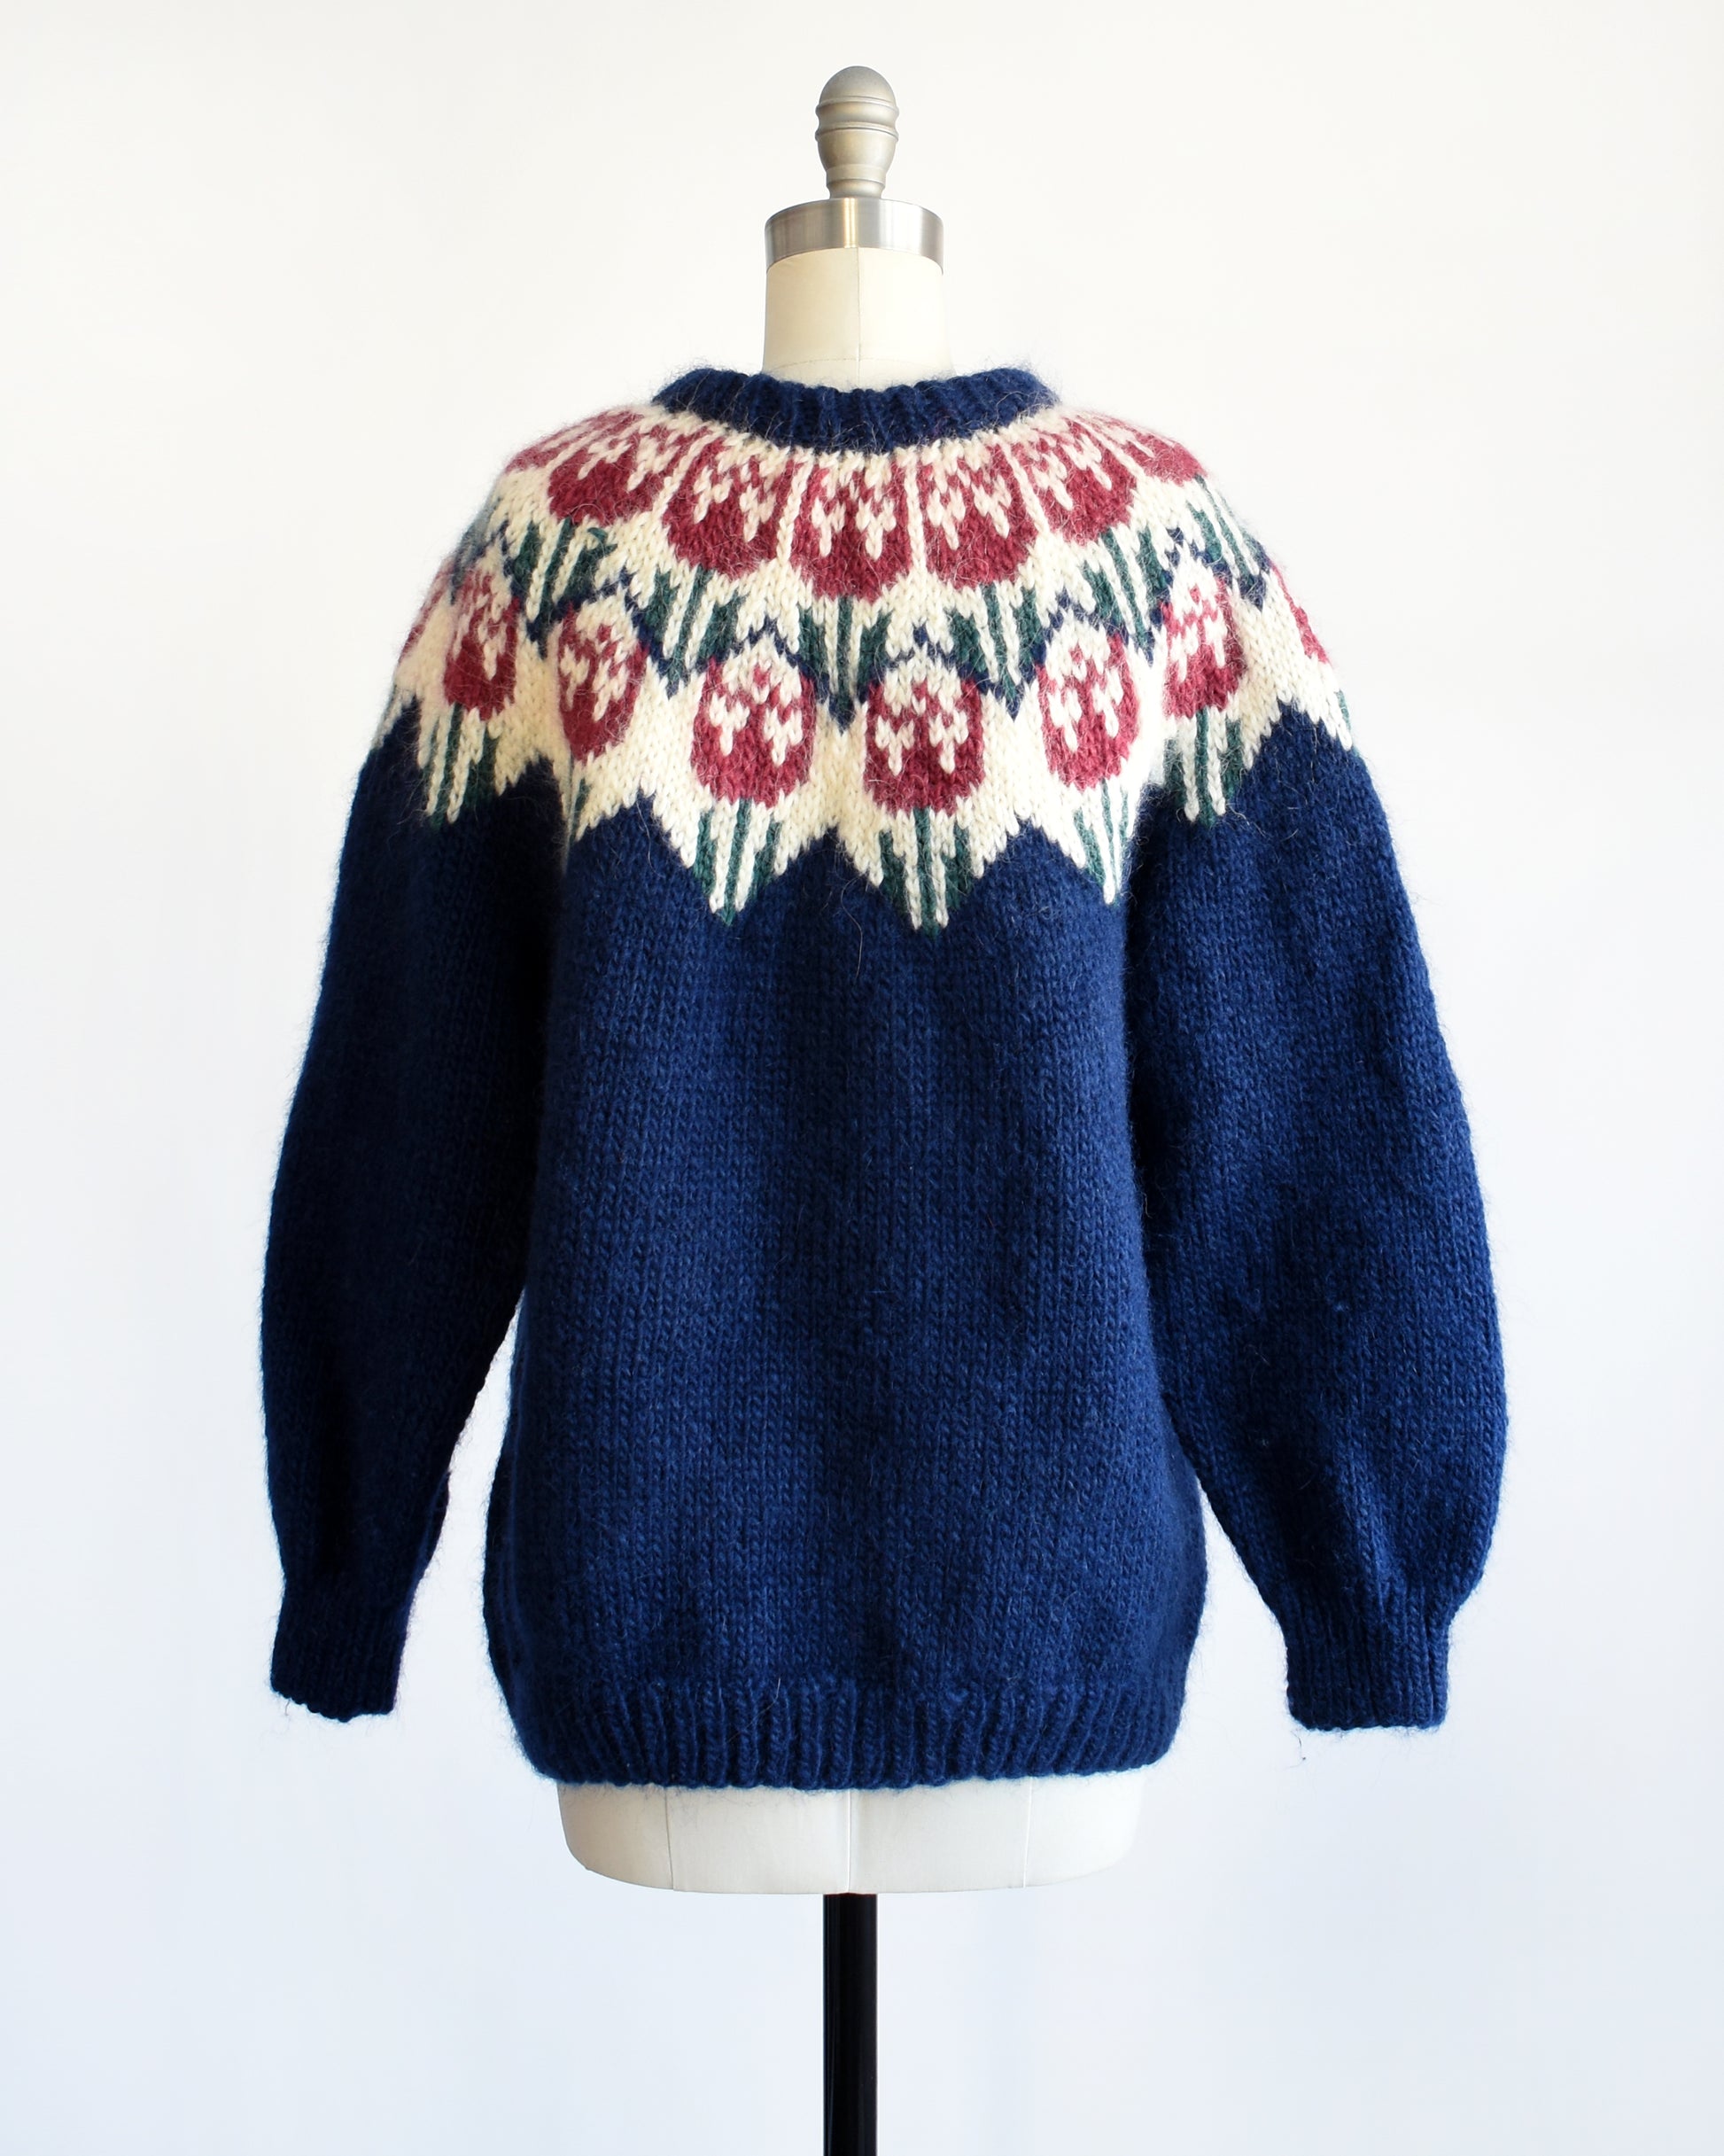 Back view of a a vintage 1980s navy blue Fair Isle sweater that features a dark pink and green tulip pattern around the collar.